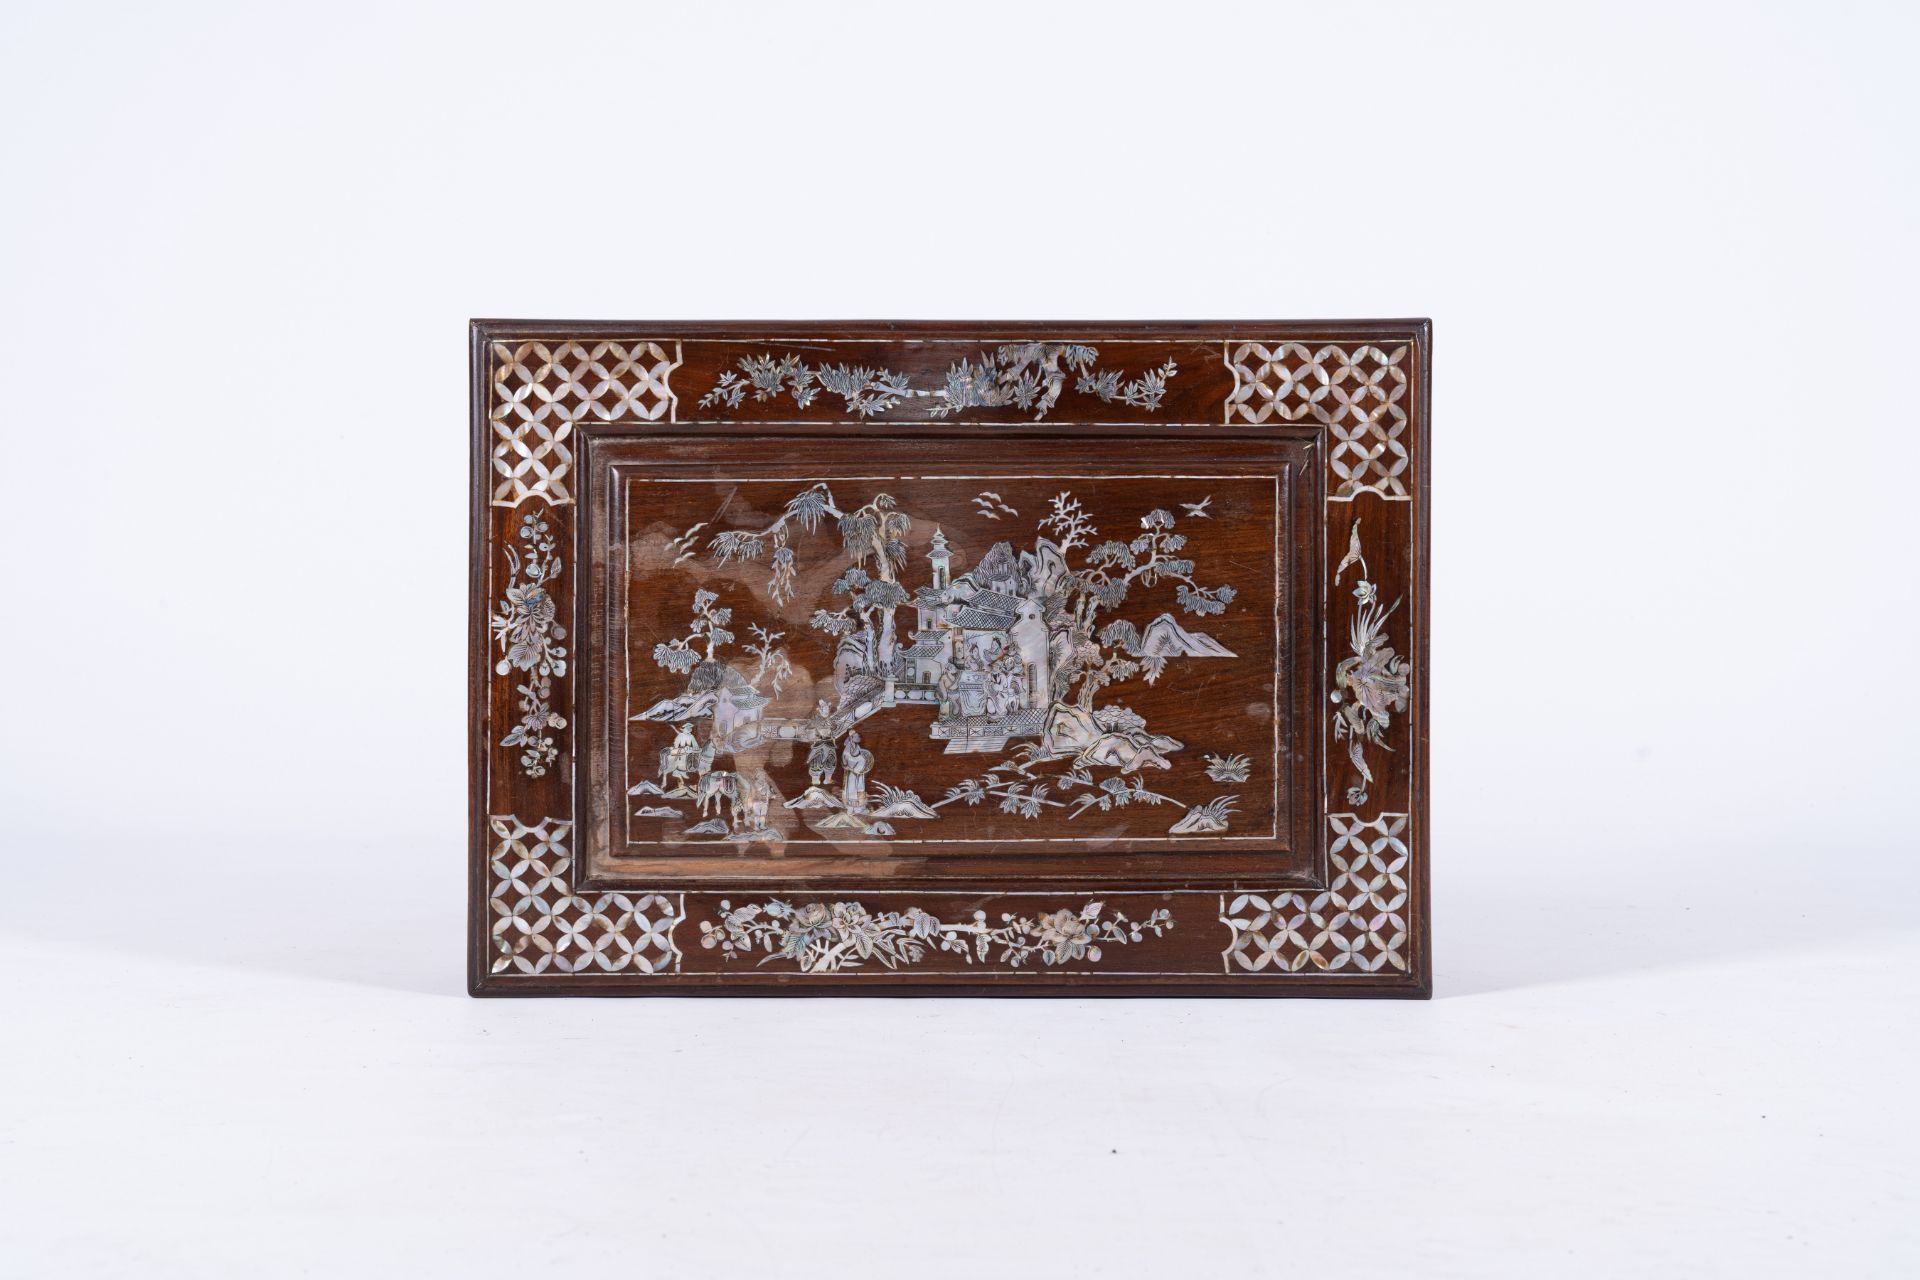 Two Chinese or Vietnamese wood side tables inlaid with mother-of-pearl with animated landscapes, 20t - Image 15 of 15